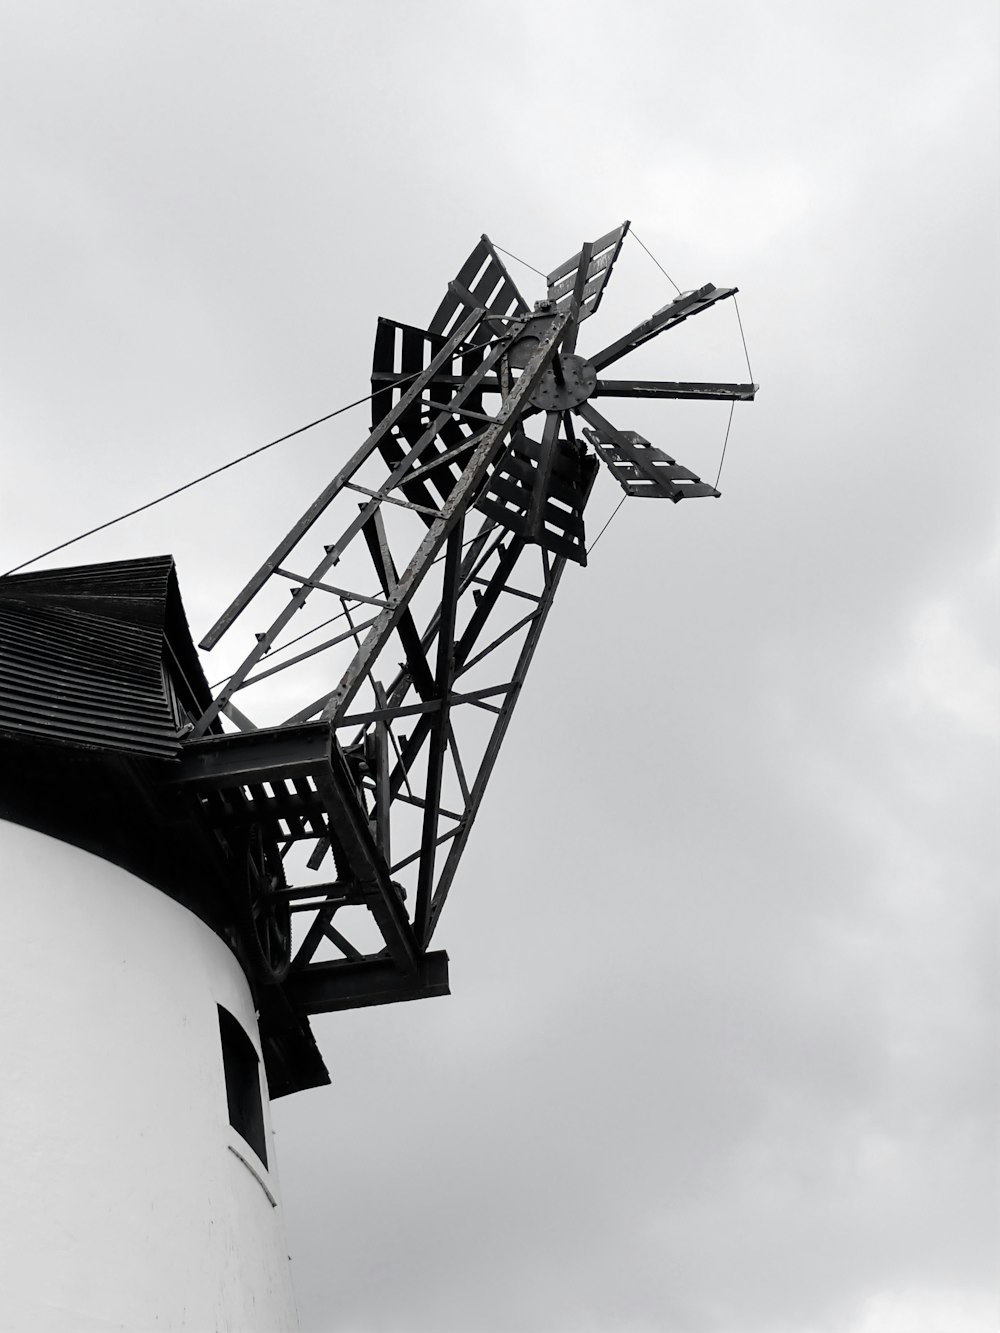 a windmill on a cloudy day